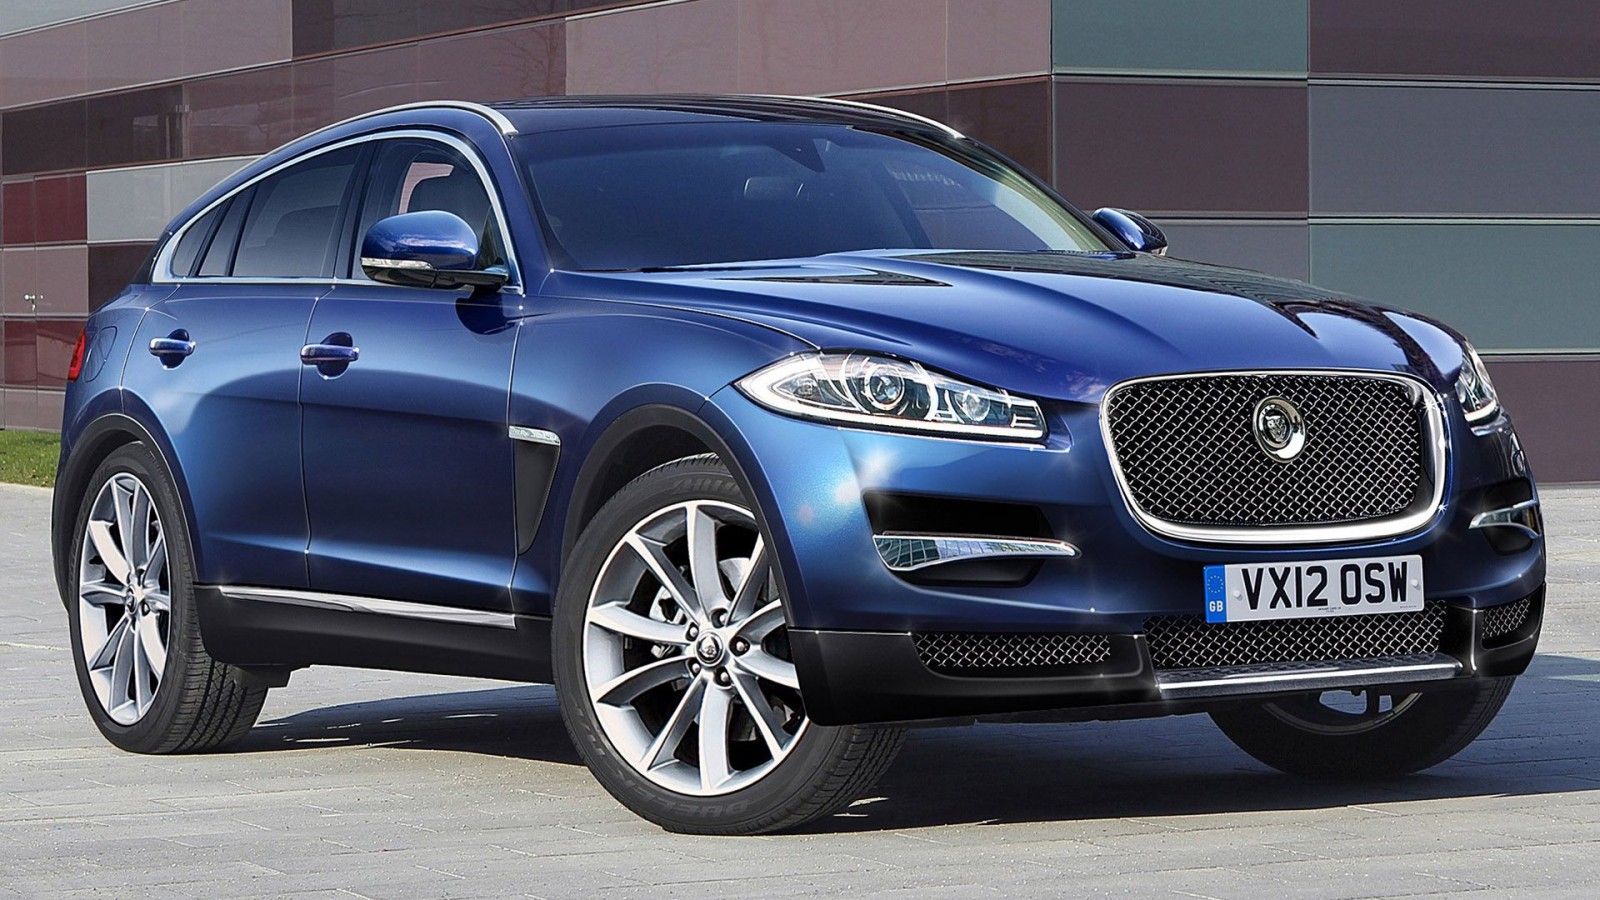 News Jaguar Could Reveal Its First Suv In Frankfurt